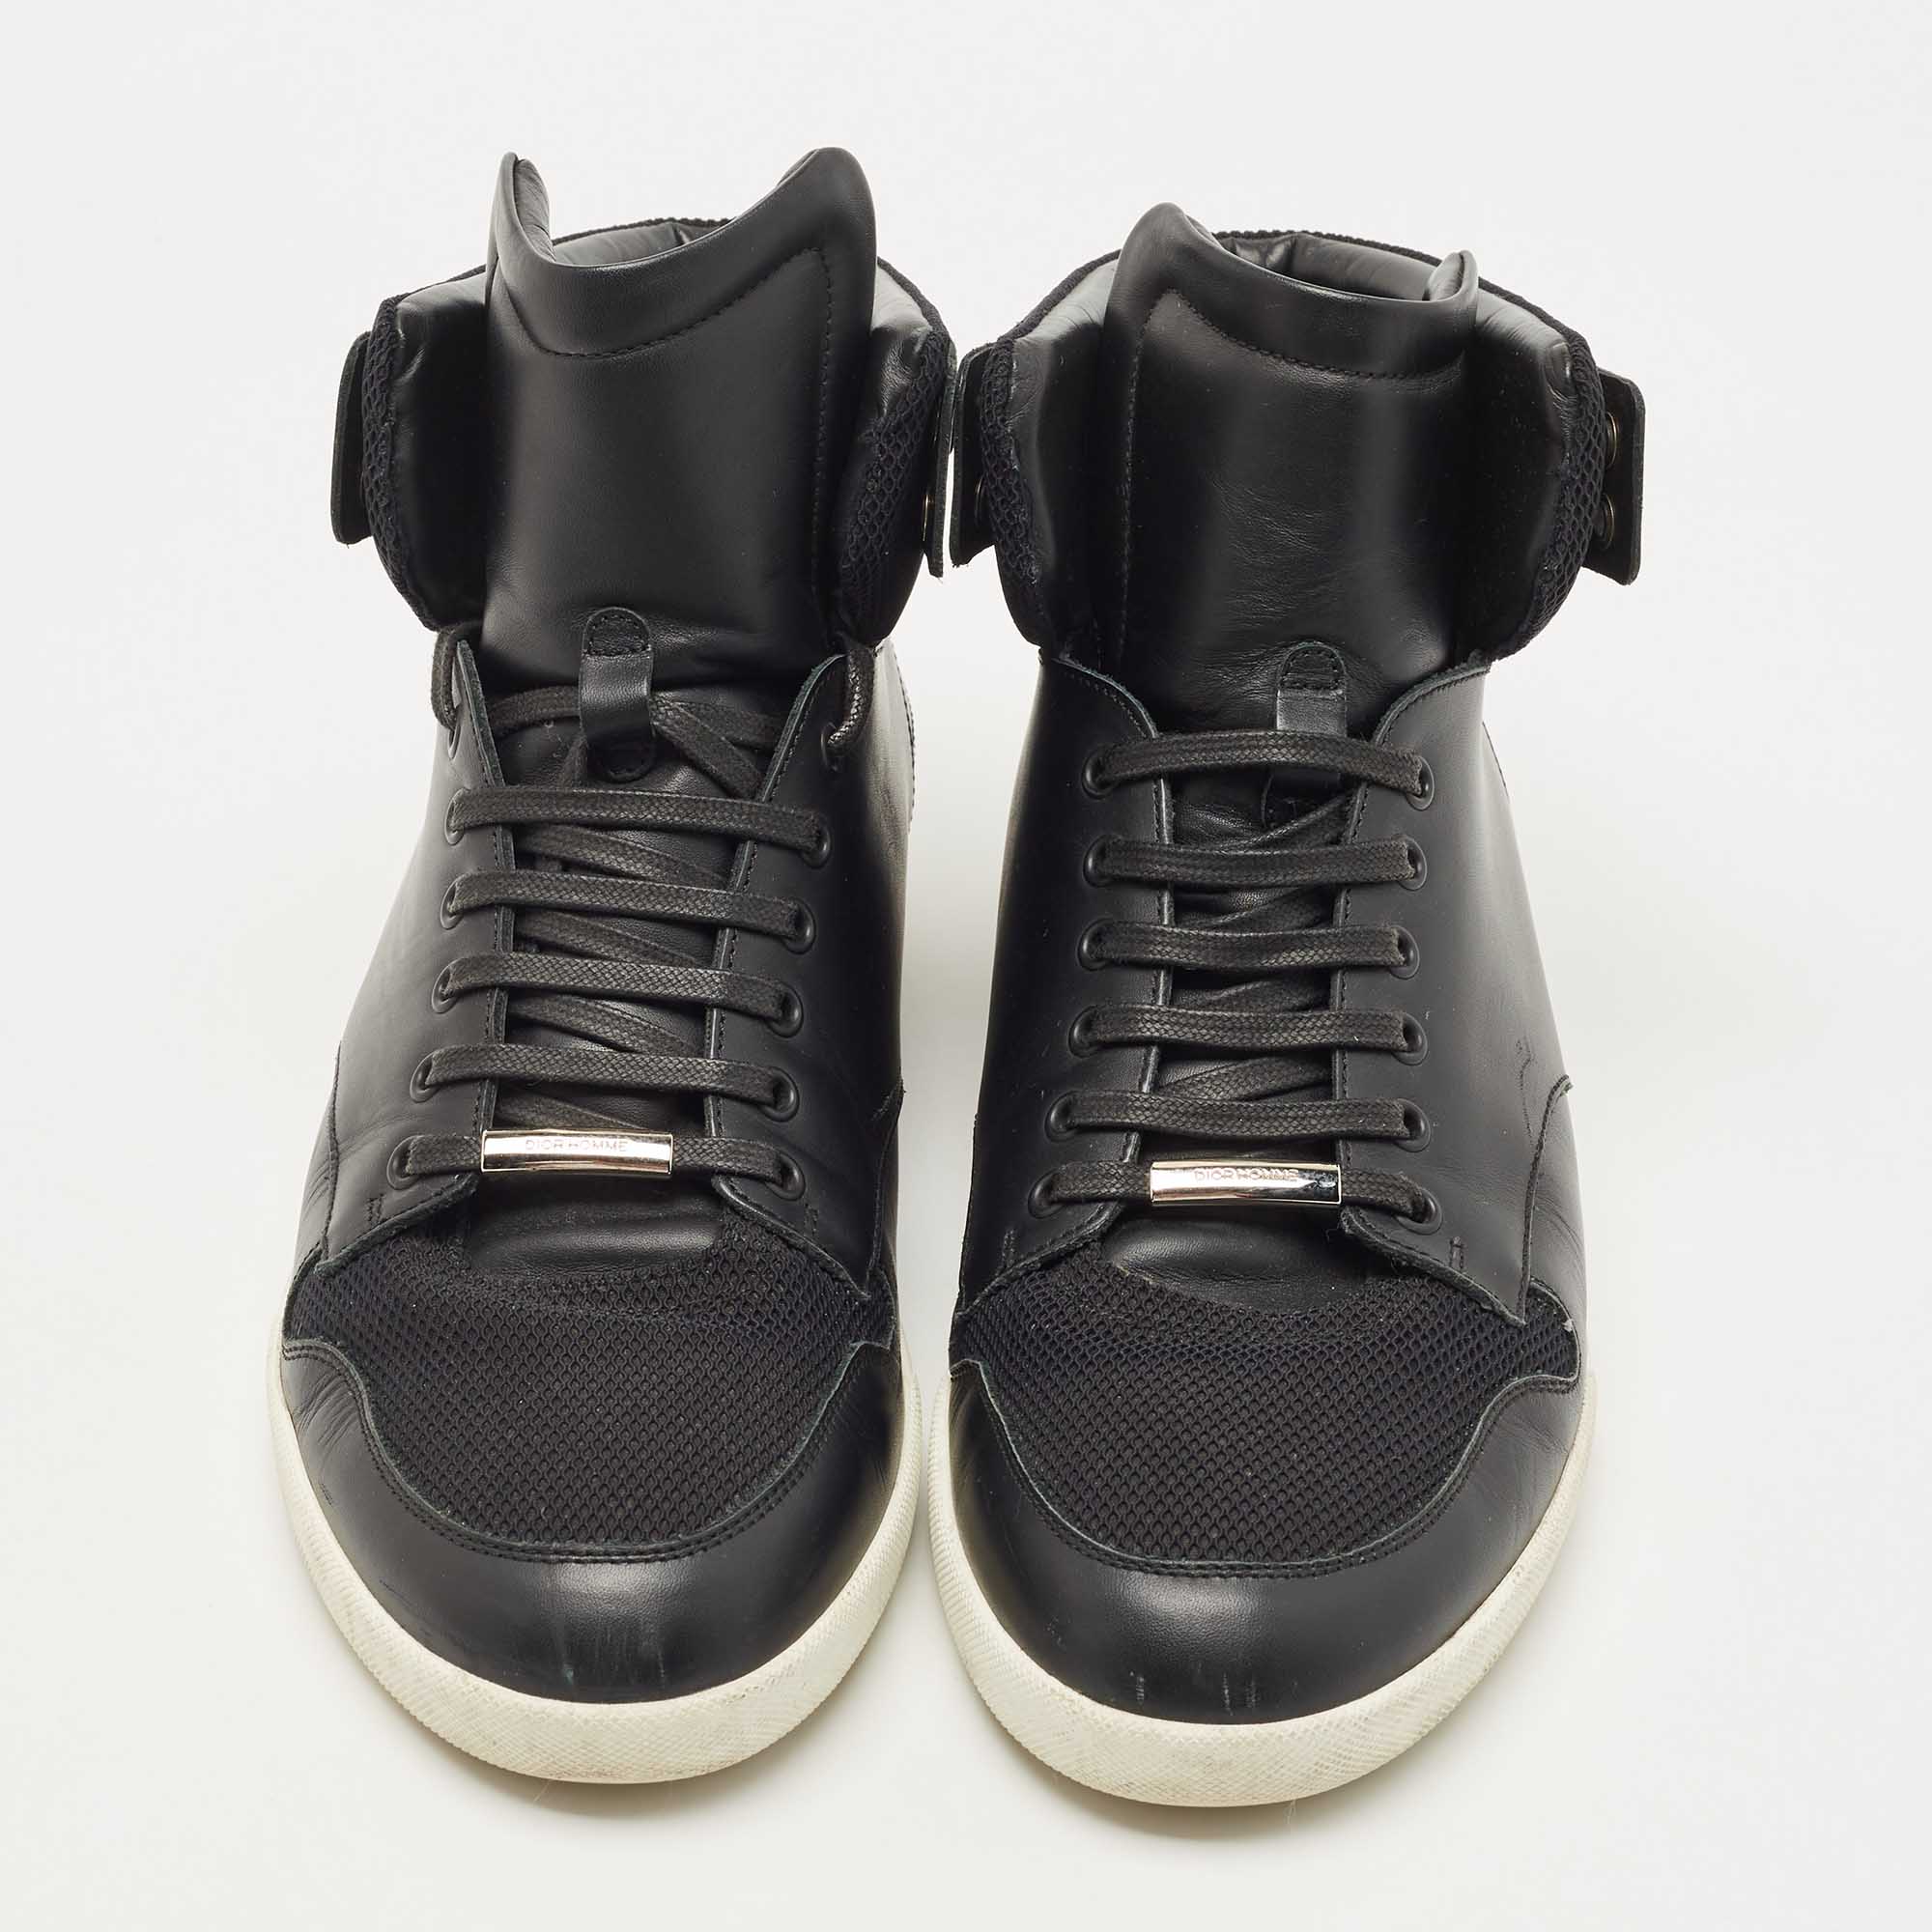 Dior Black Leather And Mesh High Top Sneakers Size 44